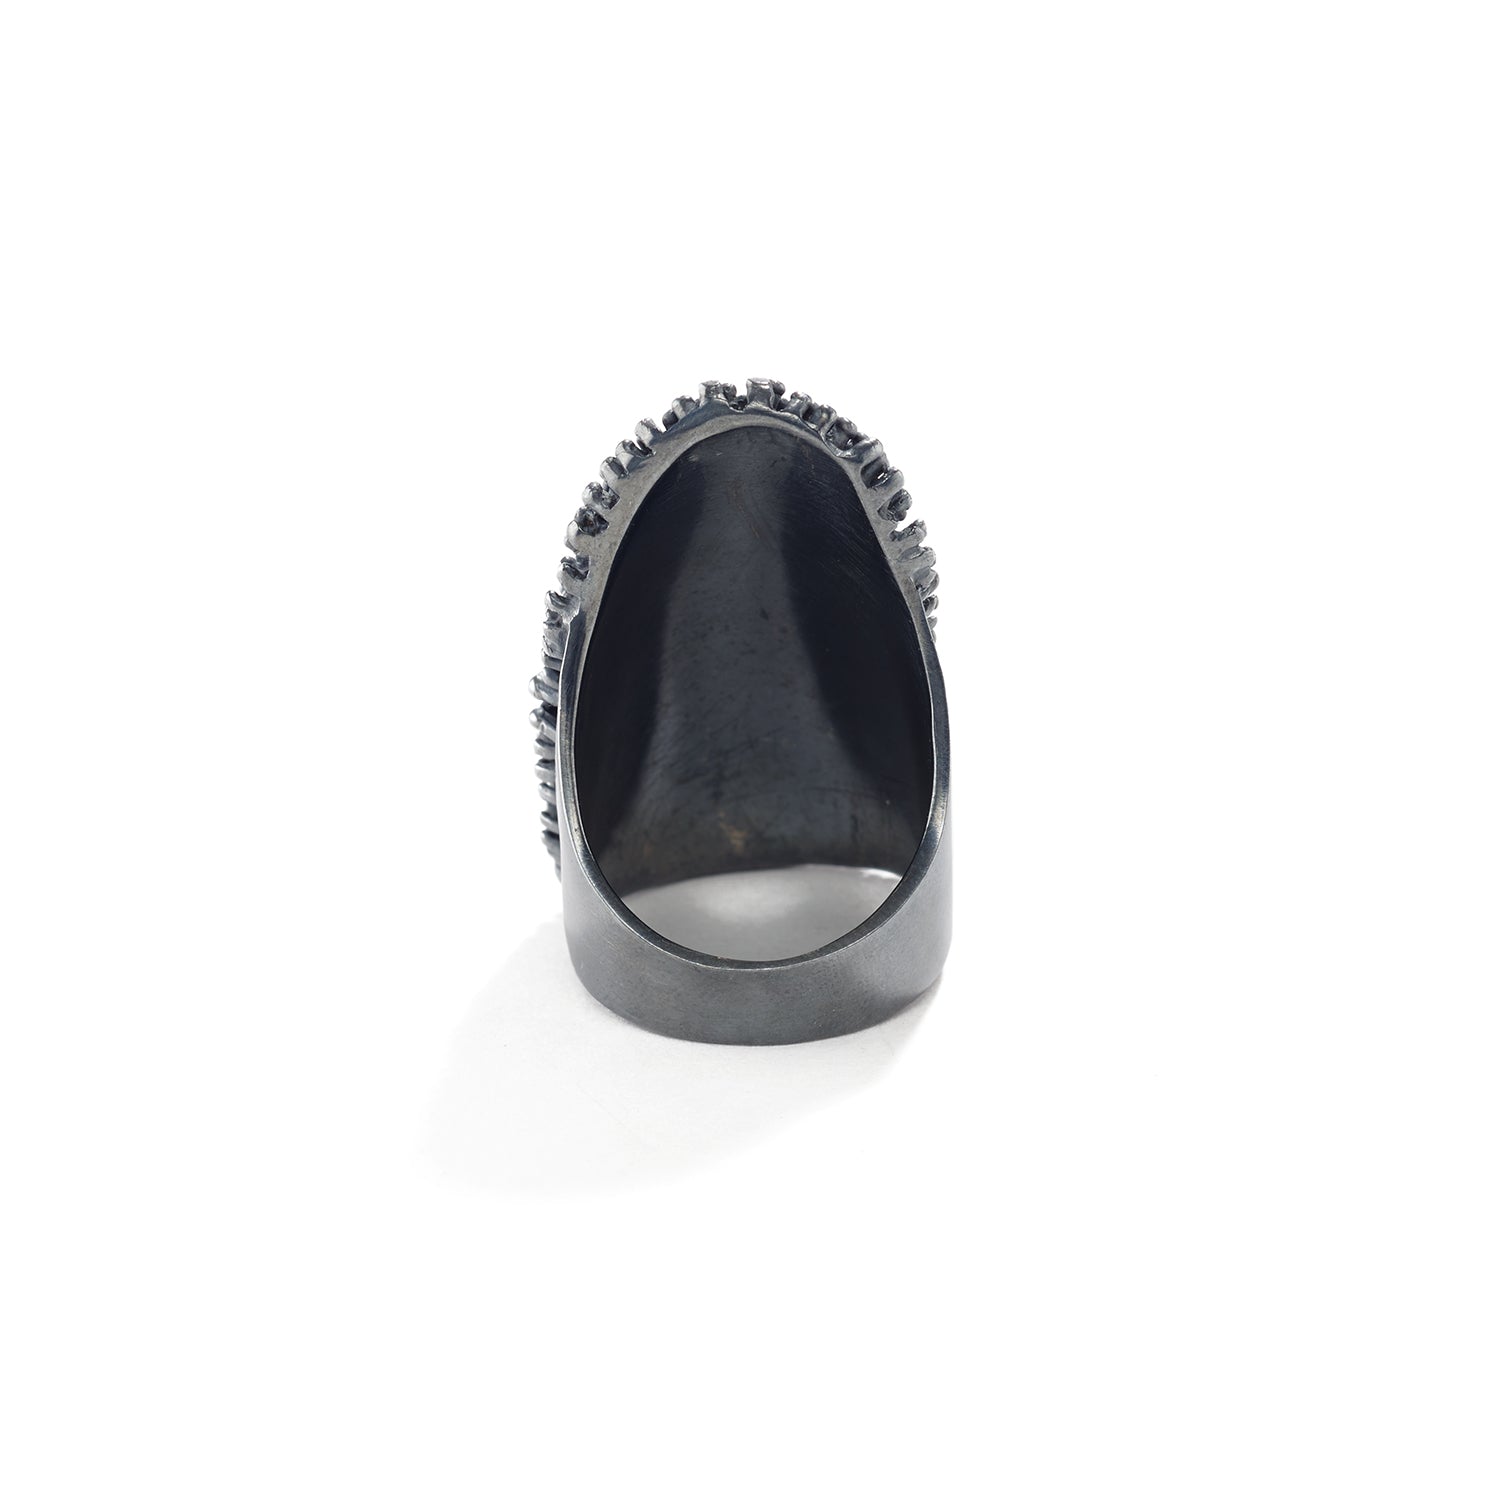 Oxidized Silver Water Droplet Ring